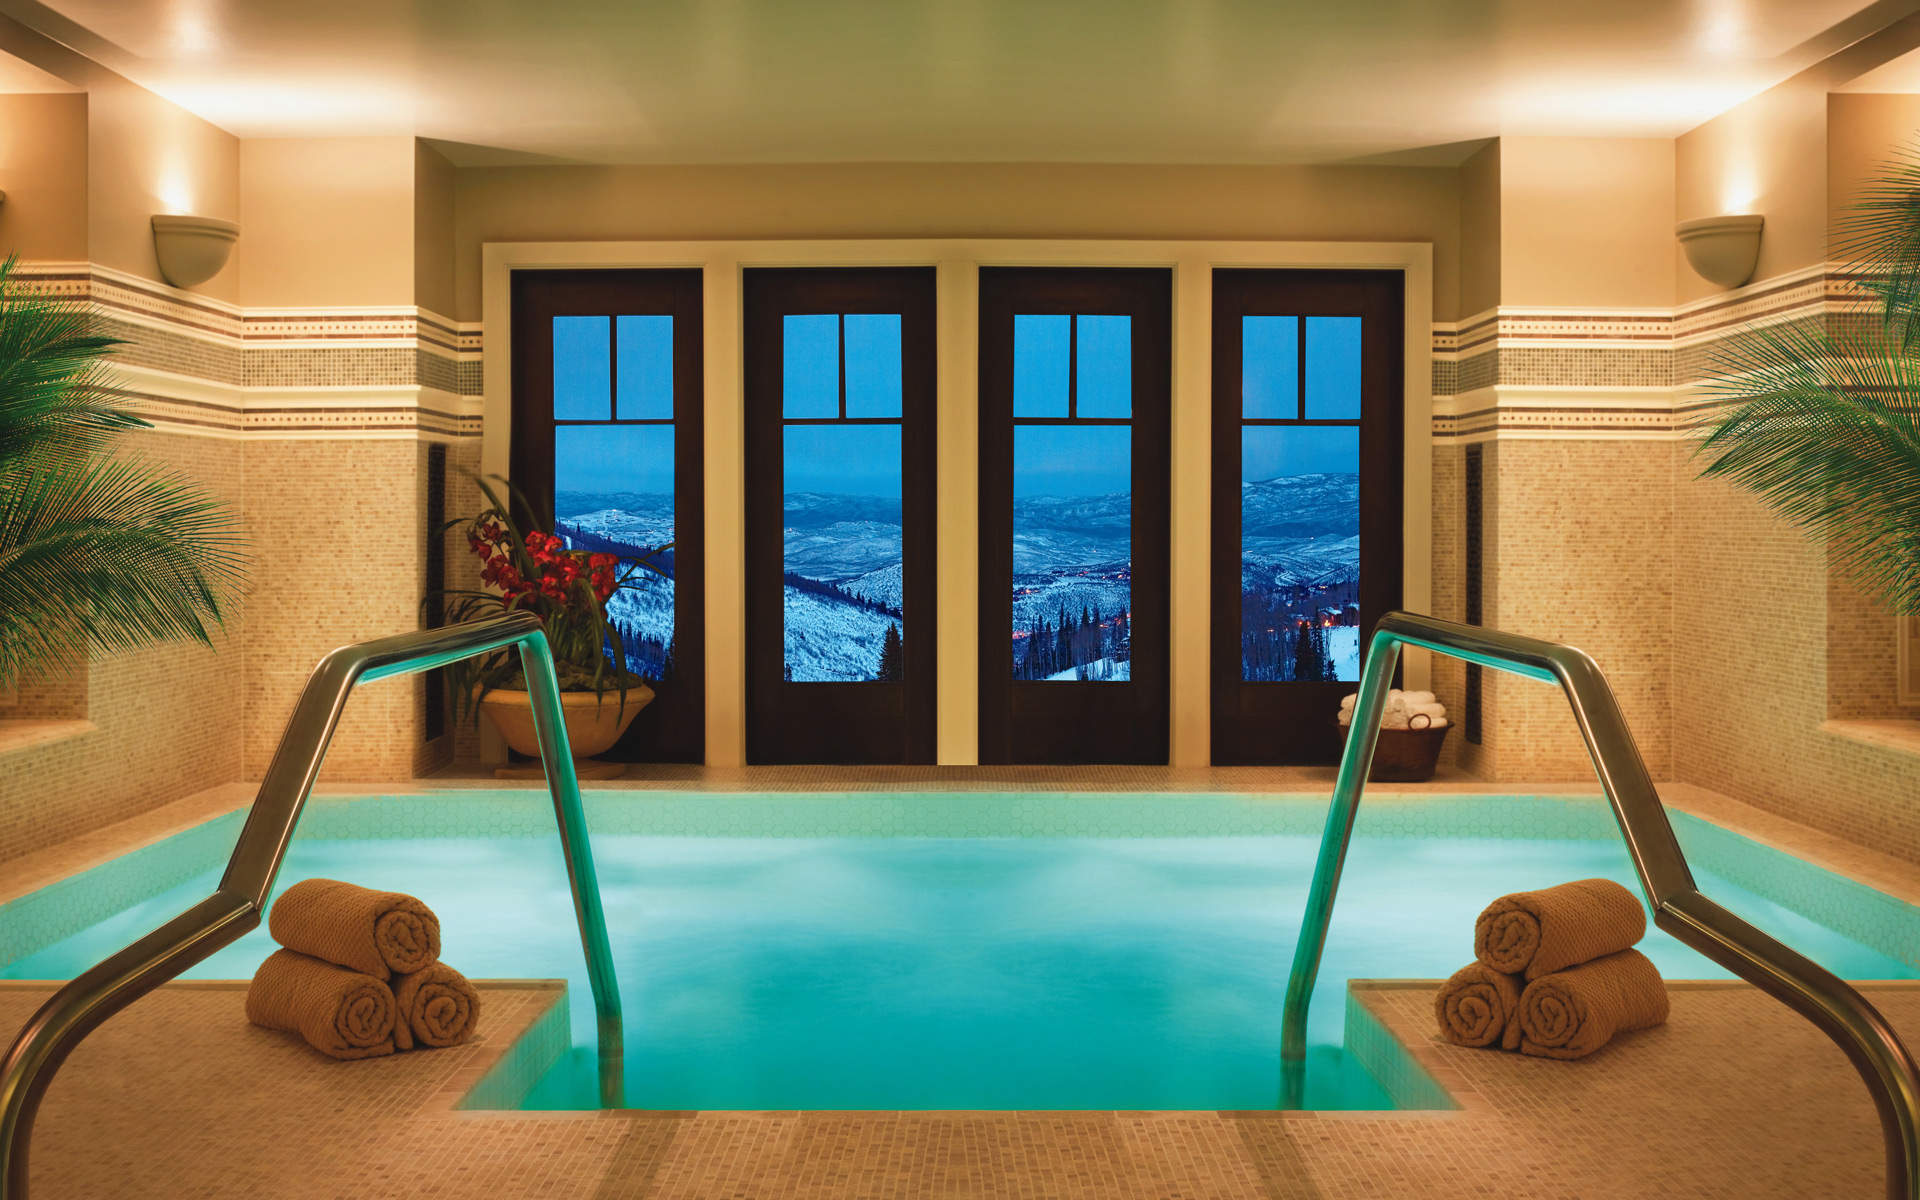 Spa of the Week: The Spa at Montage Deer Valley